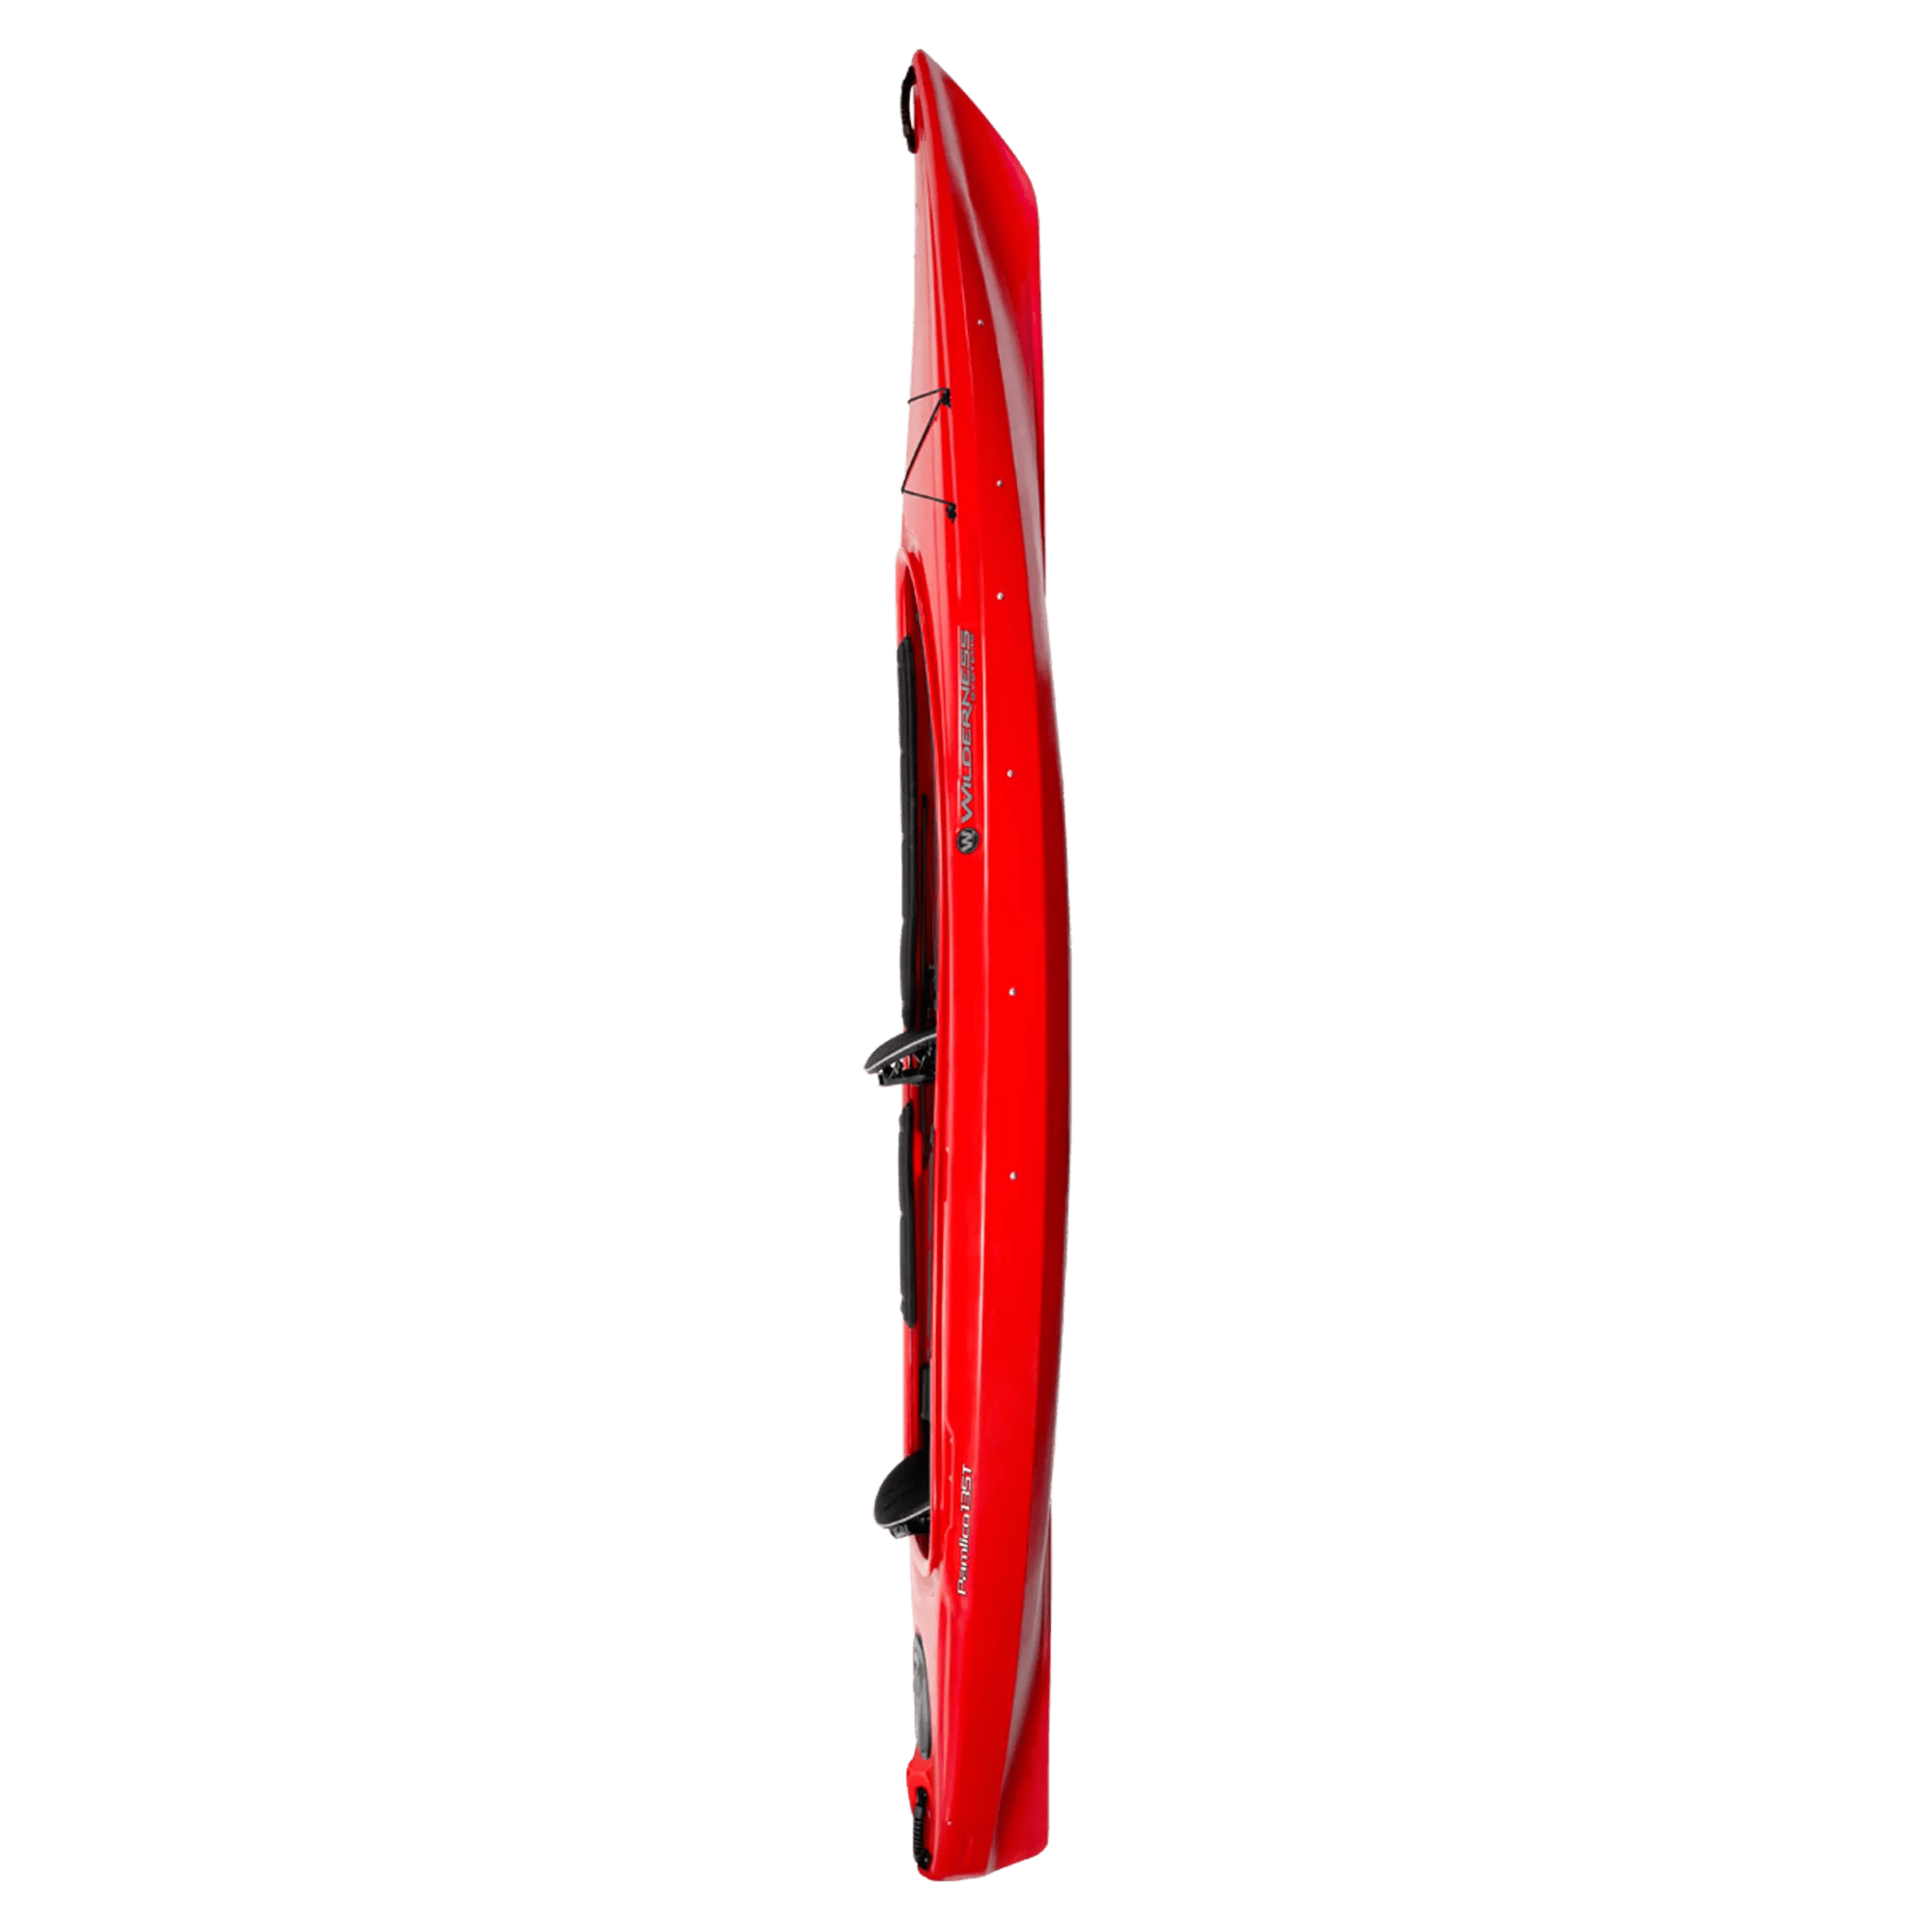 WILDERNESS SYSTEMS - Pamlico 135T Recreational Kayak - Red - 9730355040 - SIDE